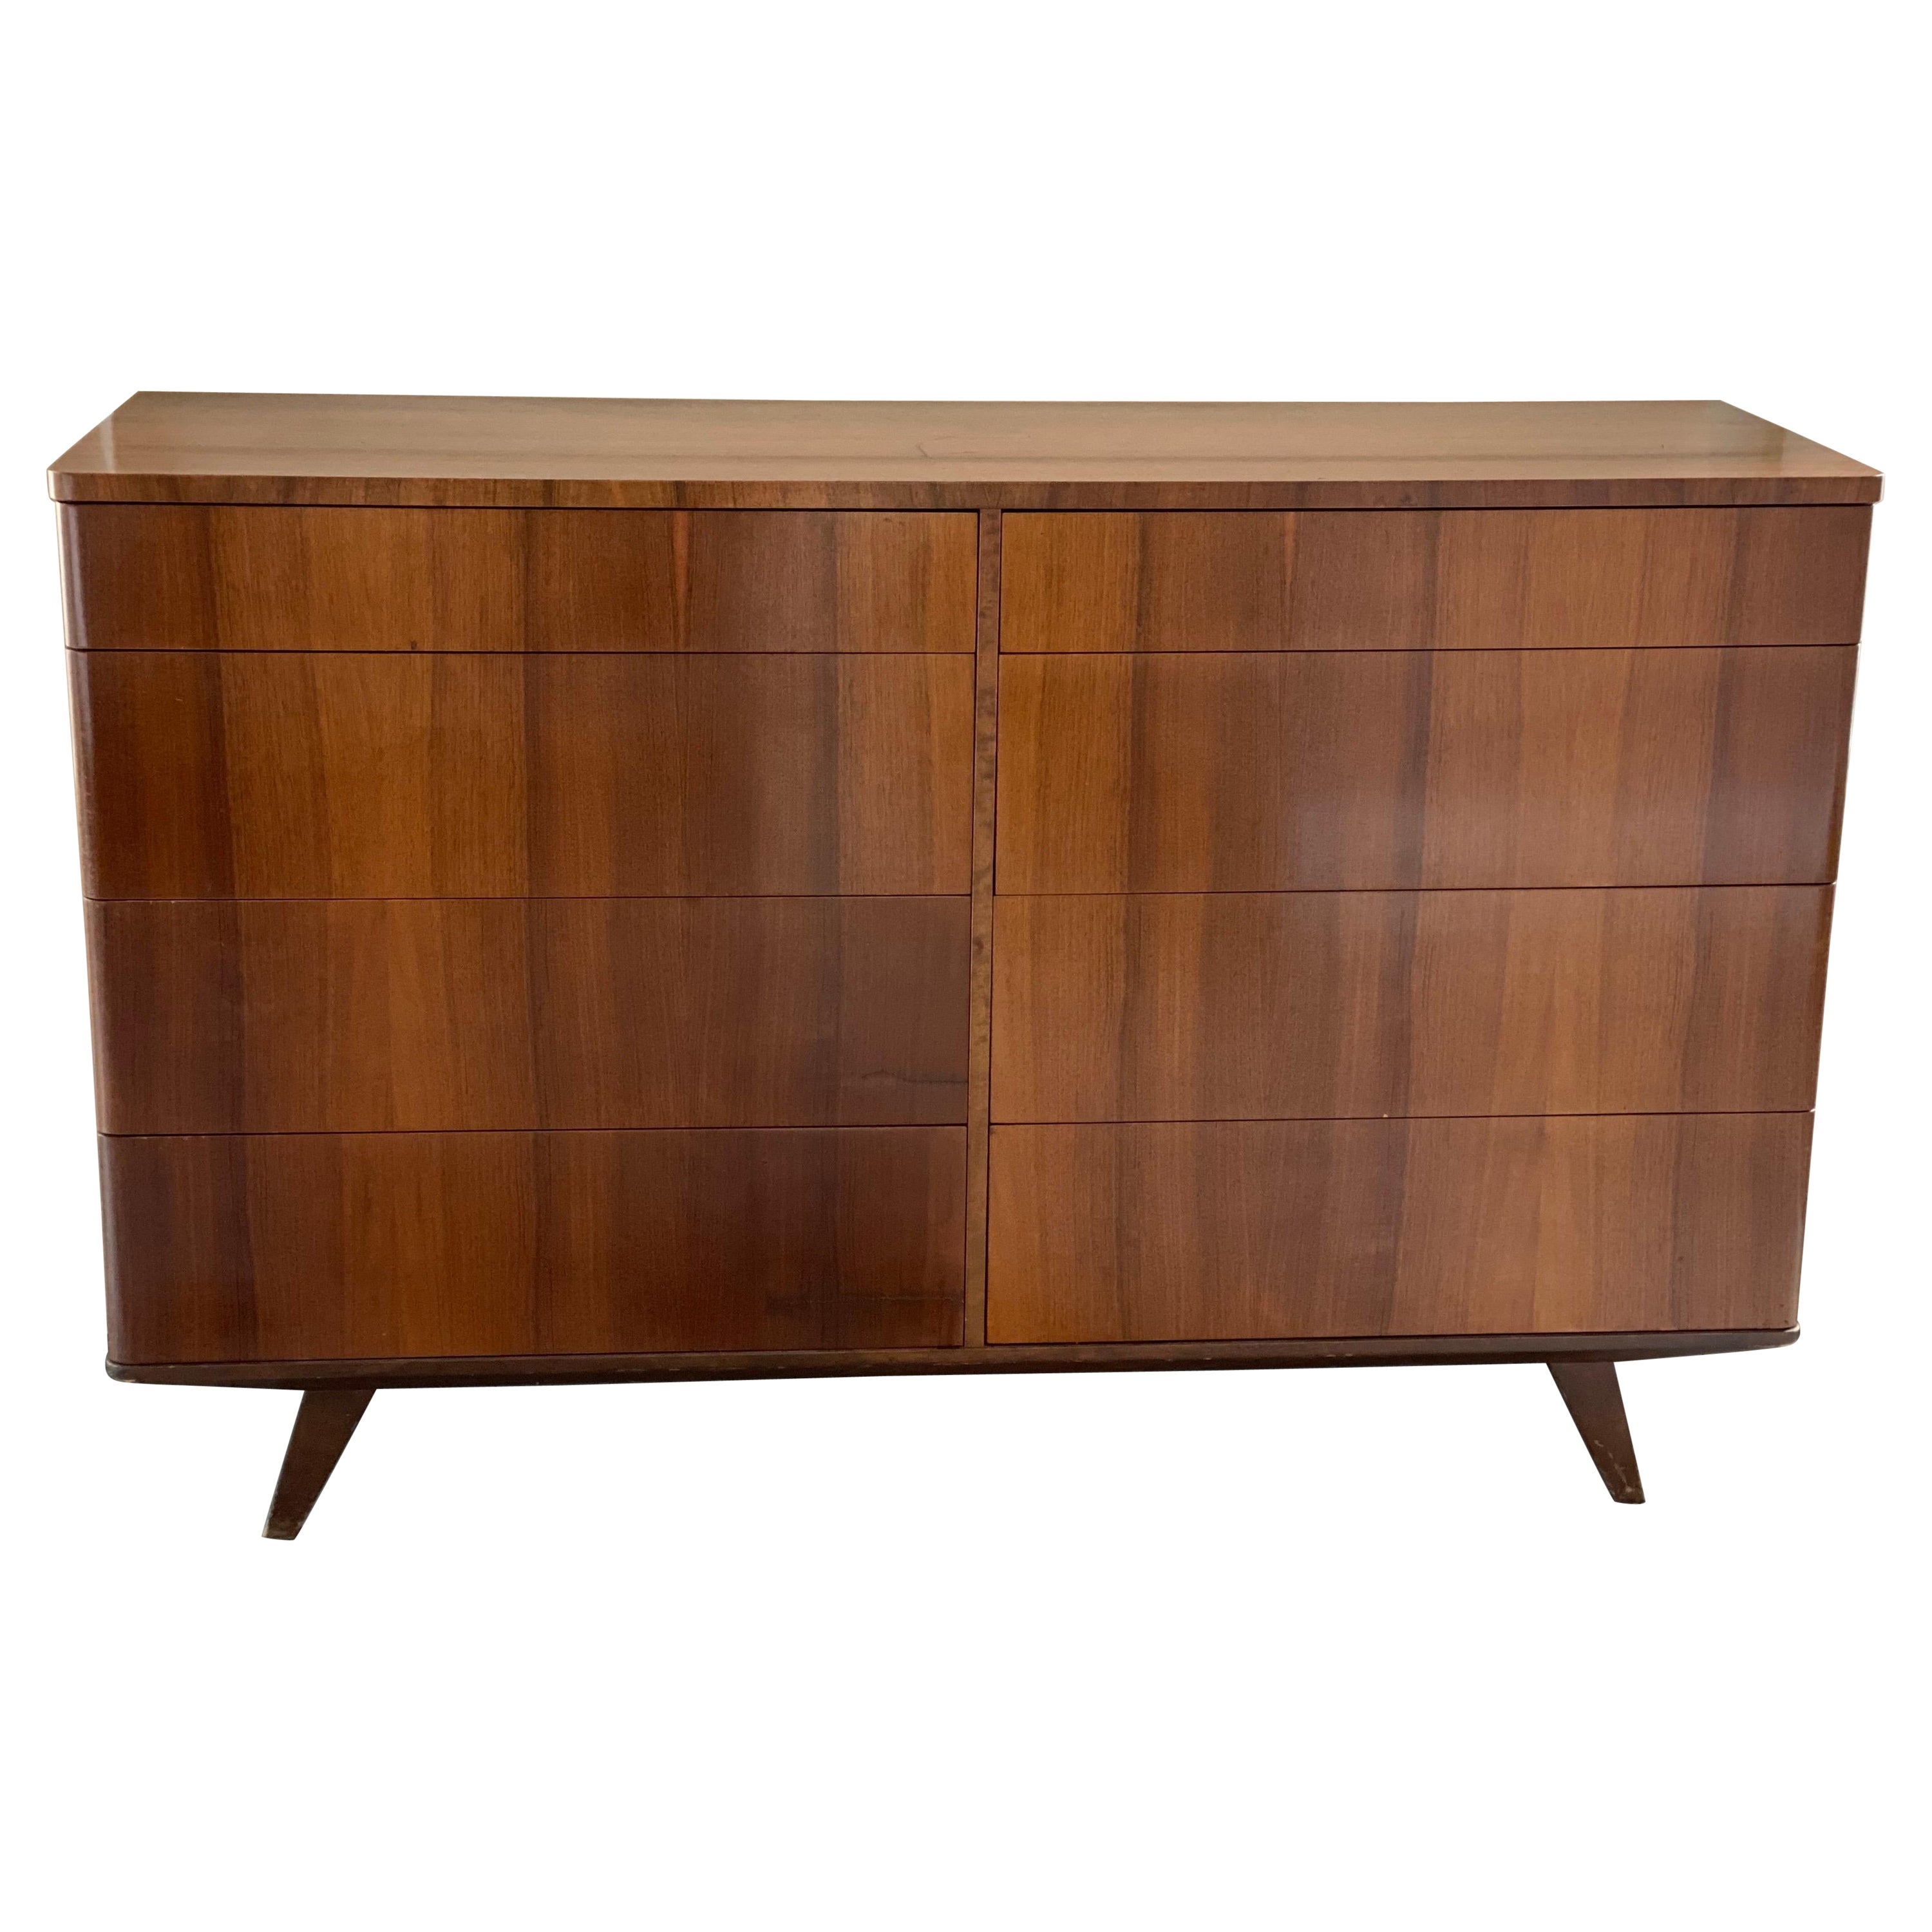 Mid-Century Modern Swedish Chest of Drawers For Sale